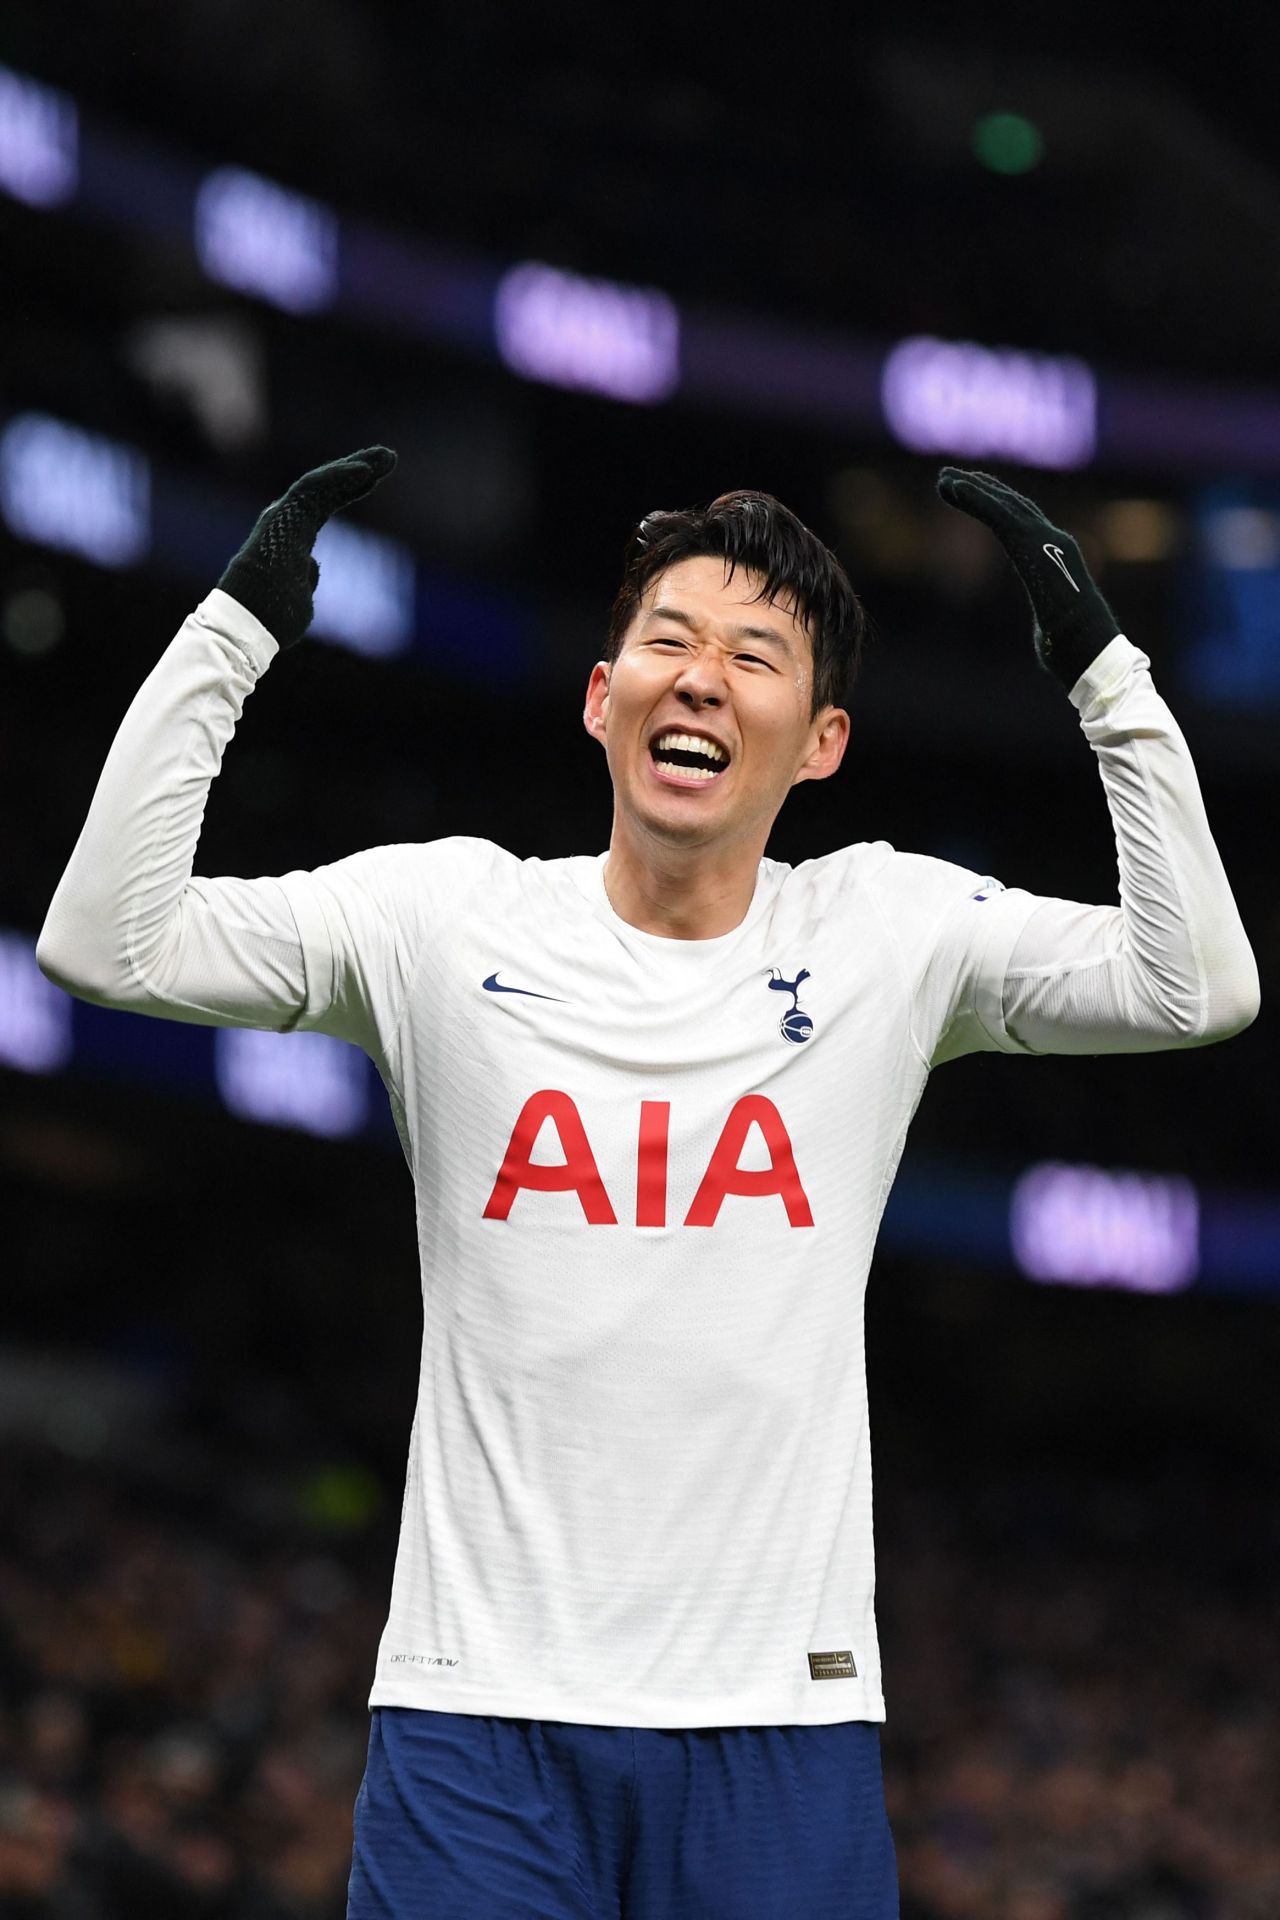 In this AFP photo, Son Heung-min of Tottenham Hotspur celebrates his goal against Norwich City during a Premier League match at Tottenham Hotspur Stadium in London on Sunday. (AFP-Yonhap)